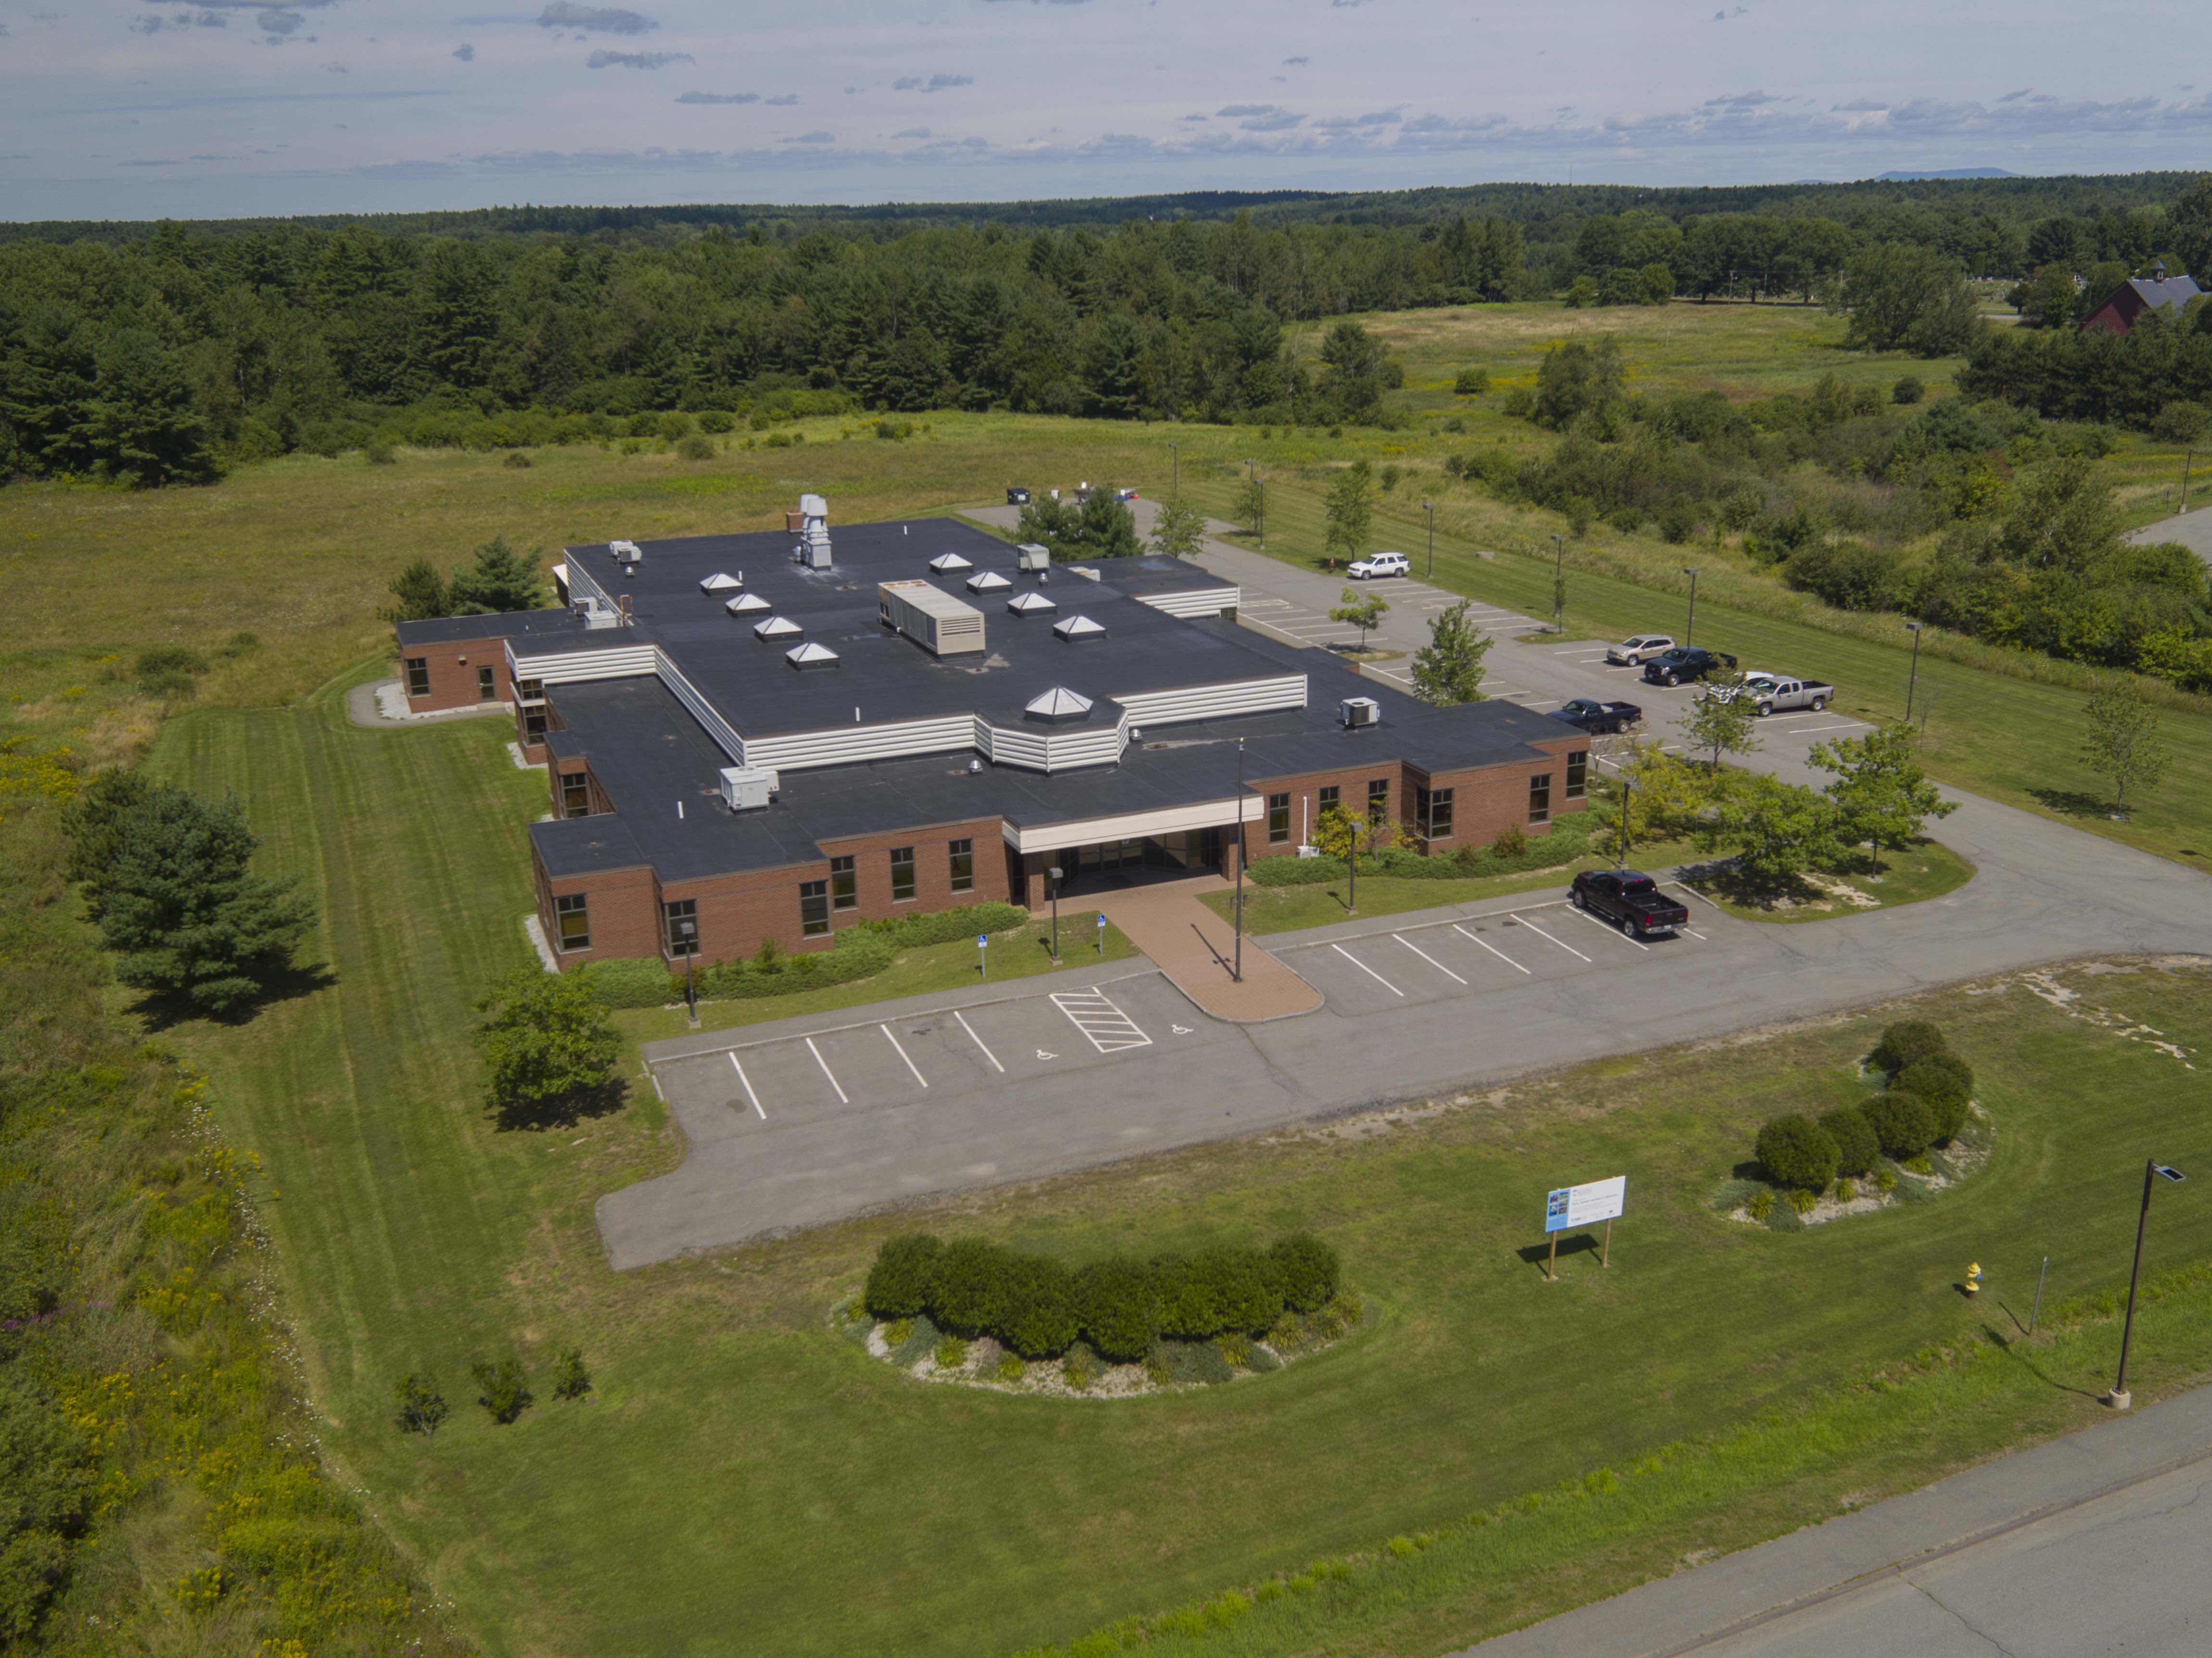 Arial View of the new UMaine Cooperative Extension Diagnostic and Research Laboratory building